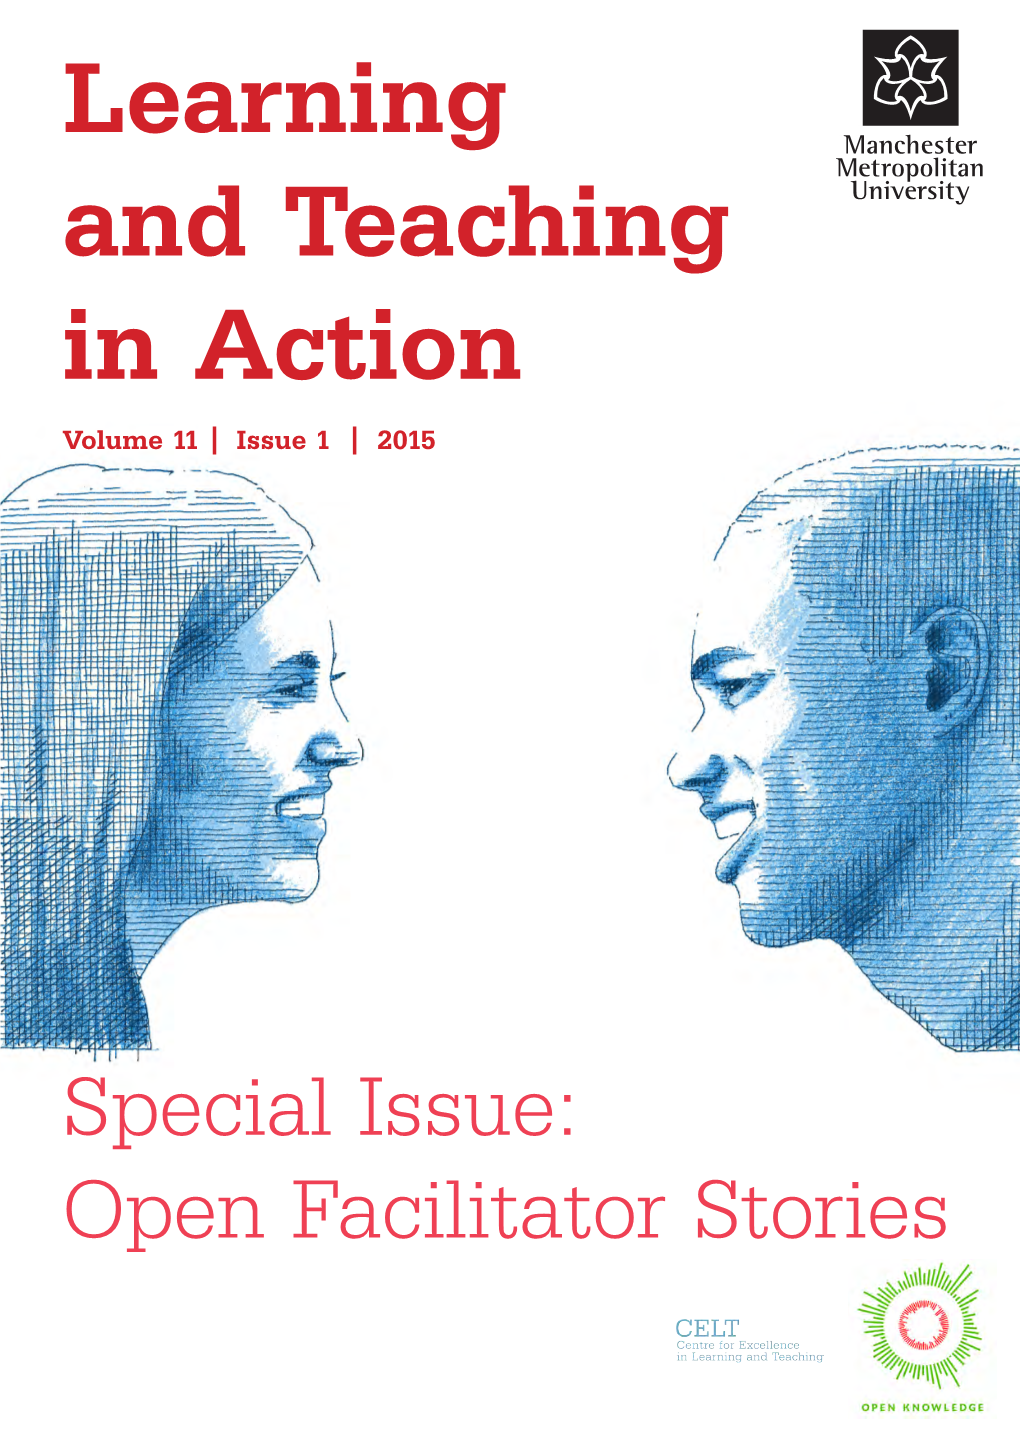 Learning and Teaching in Action Volume 11 Issue 1 2015